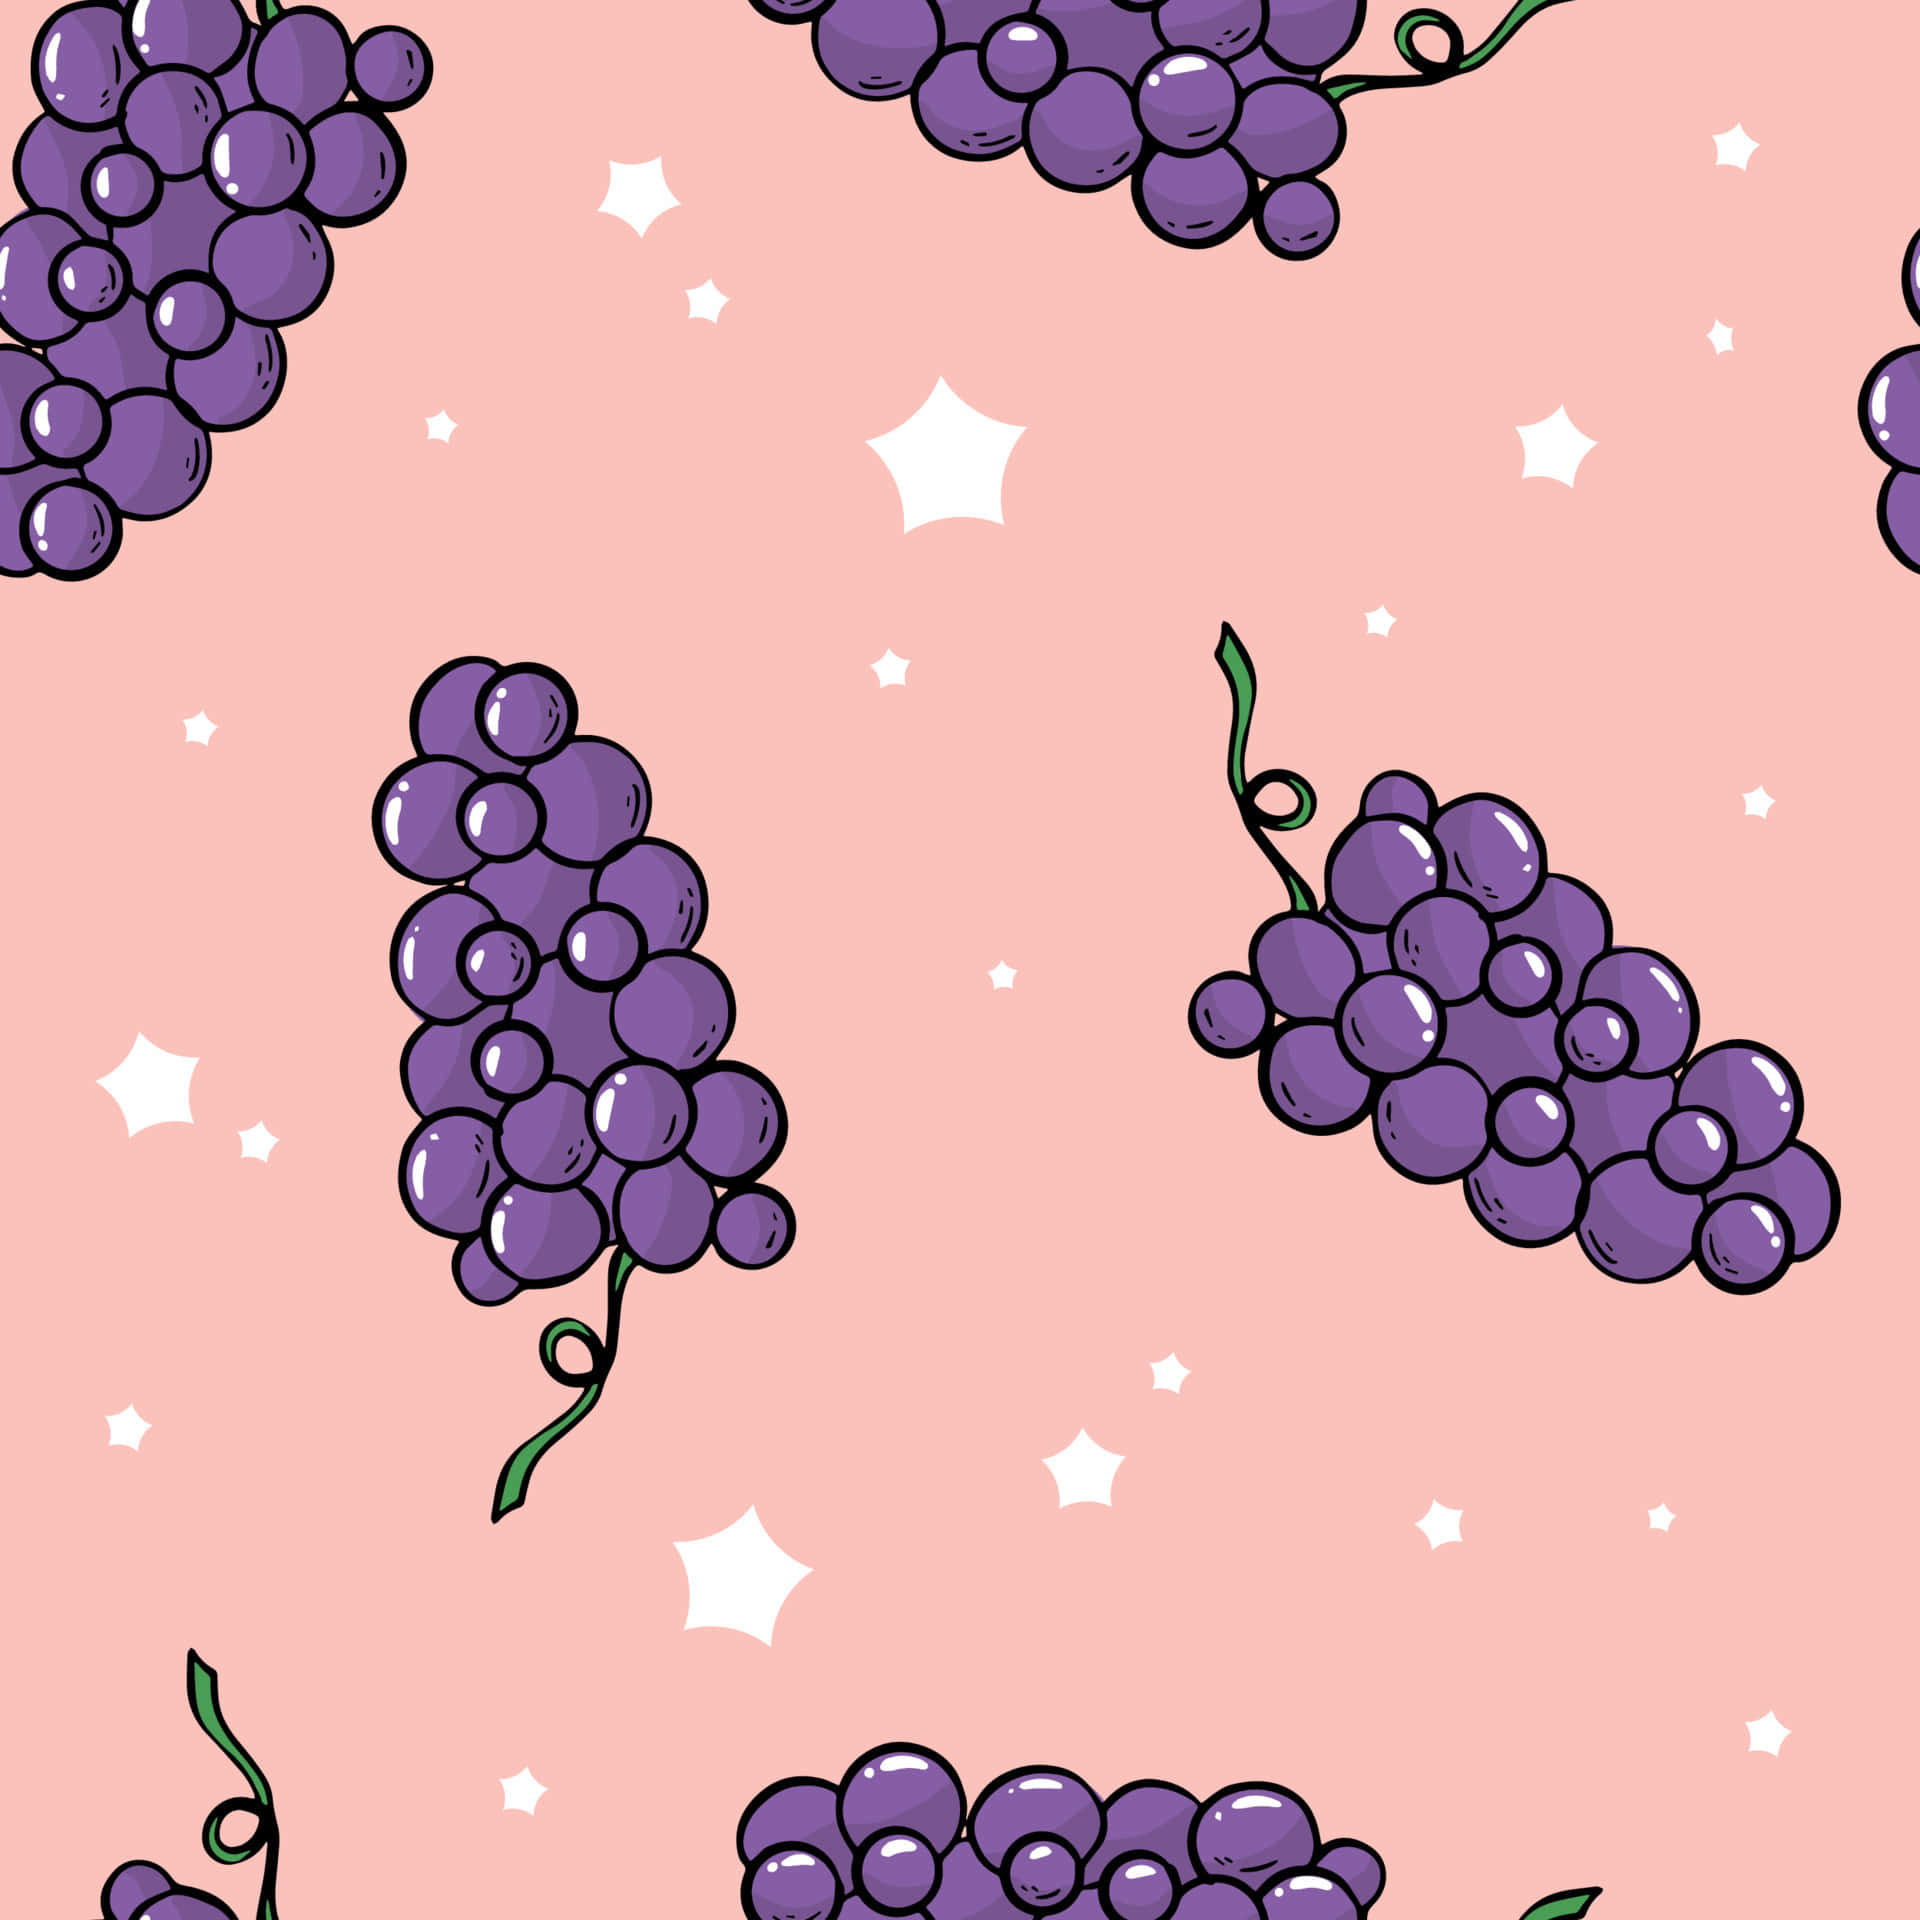 Bunch of Fresh Grapes on a Vine